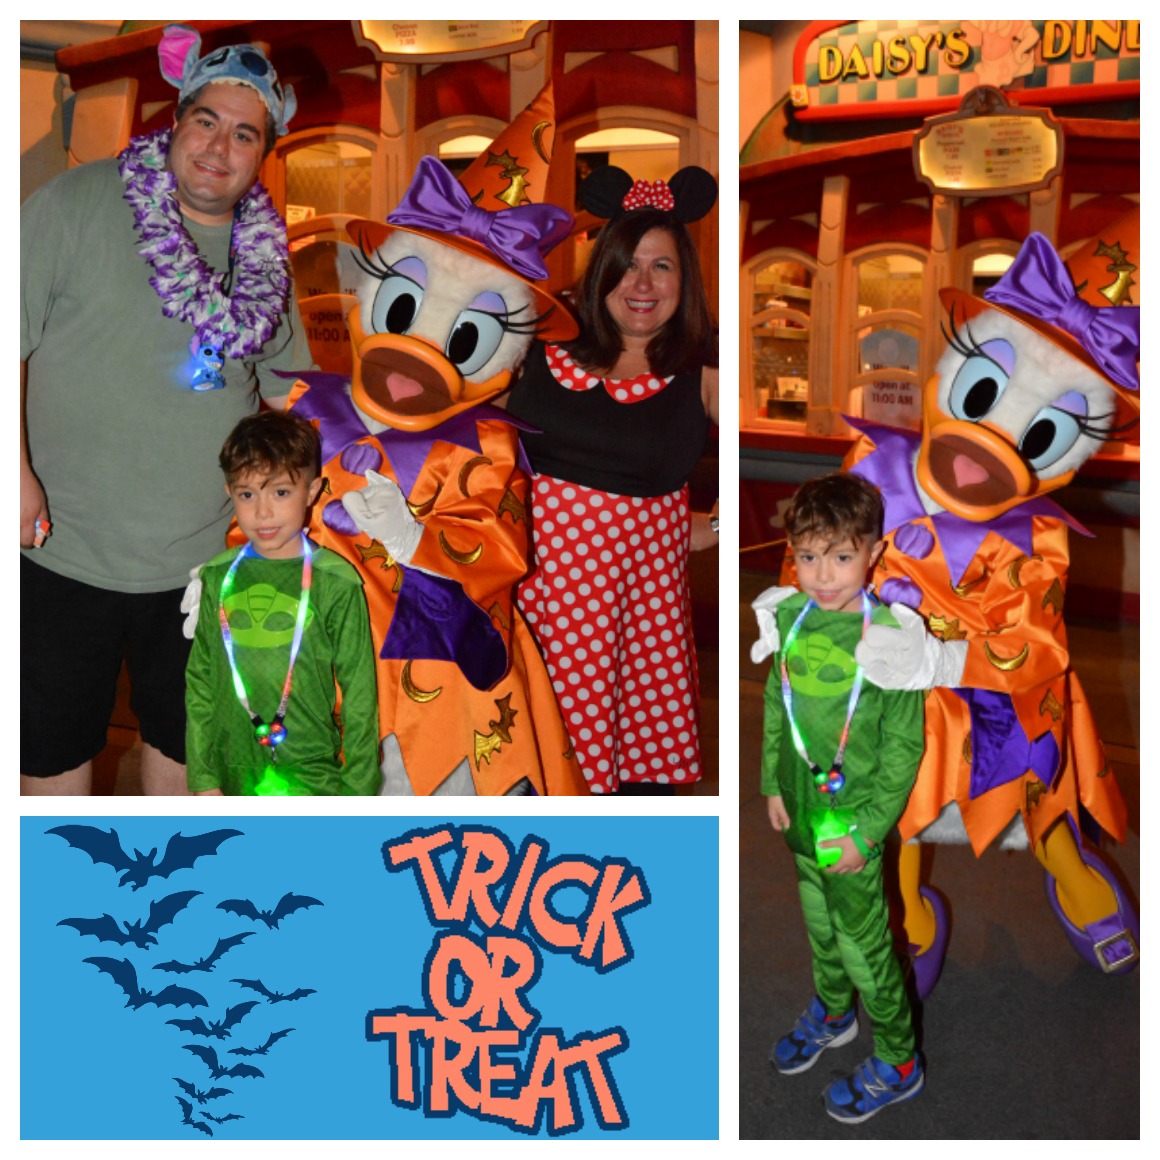 Tips & Tricks for Mickey's Halloween Party at Disneyland with Kids | Disneyland Halloween Party | Mickey's Halloween | Disneyland tips | Disneyland tips and tricks